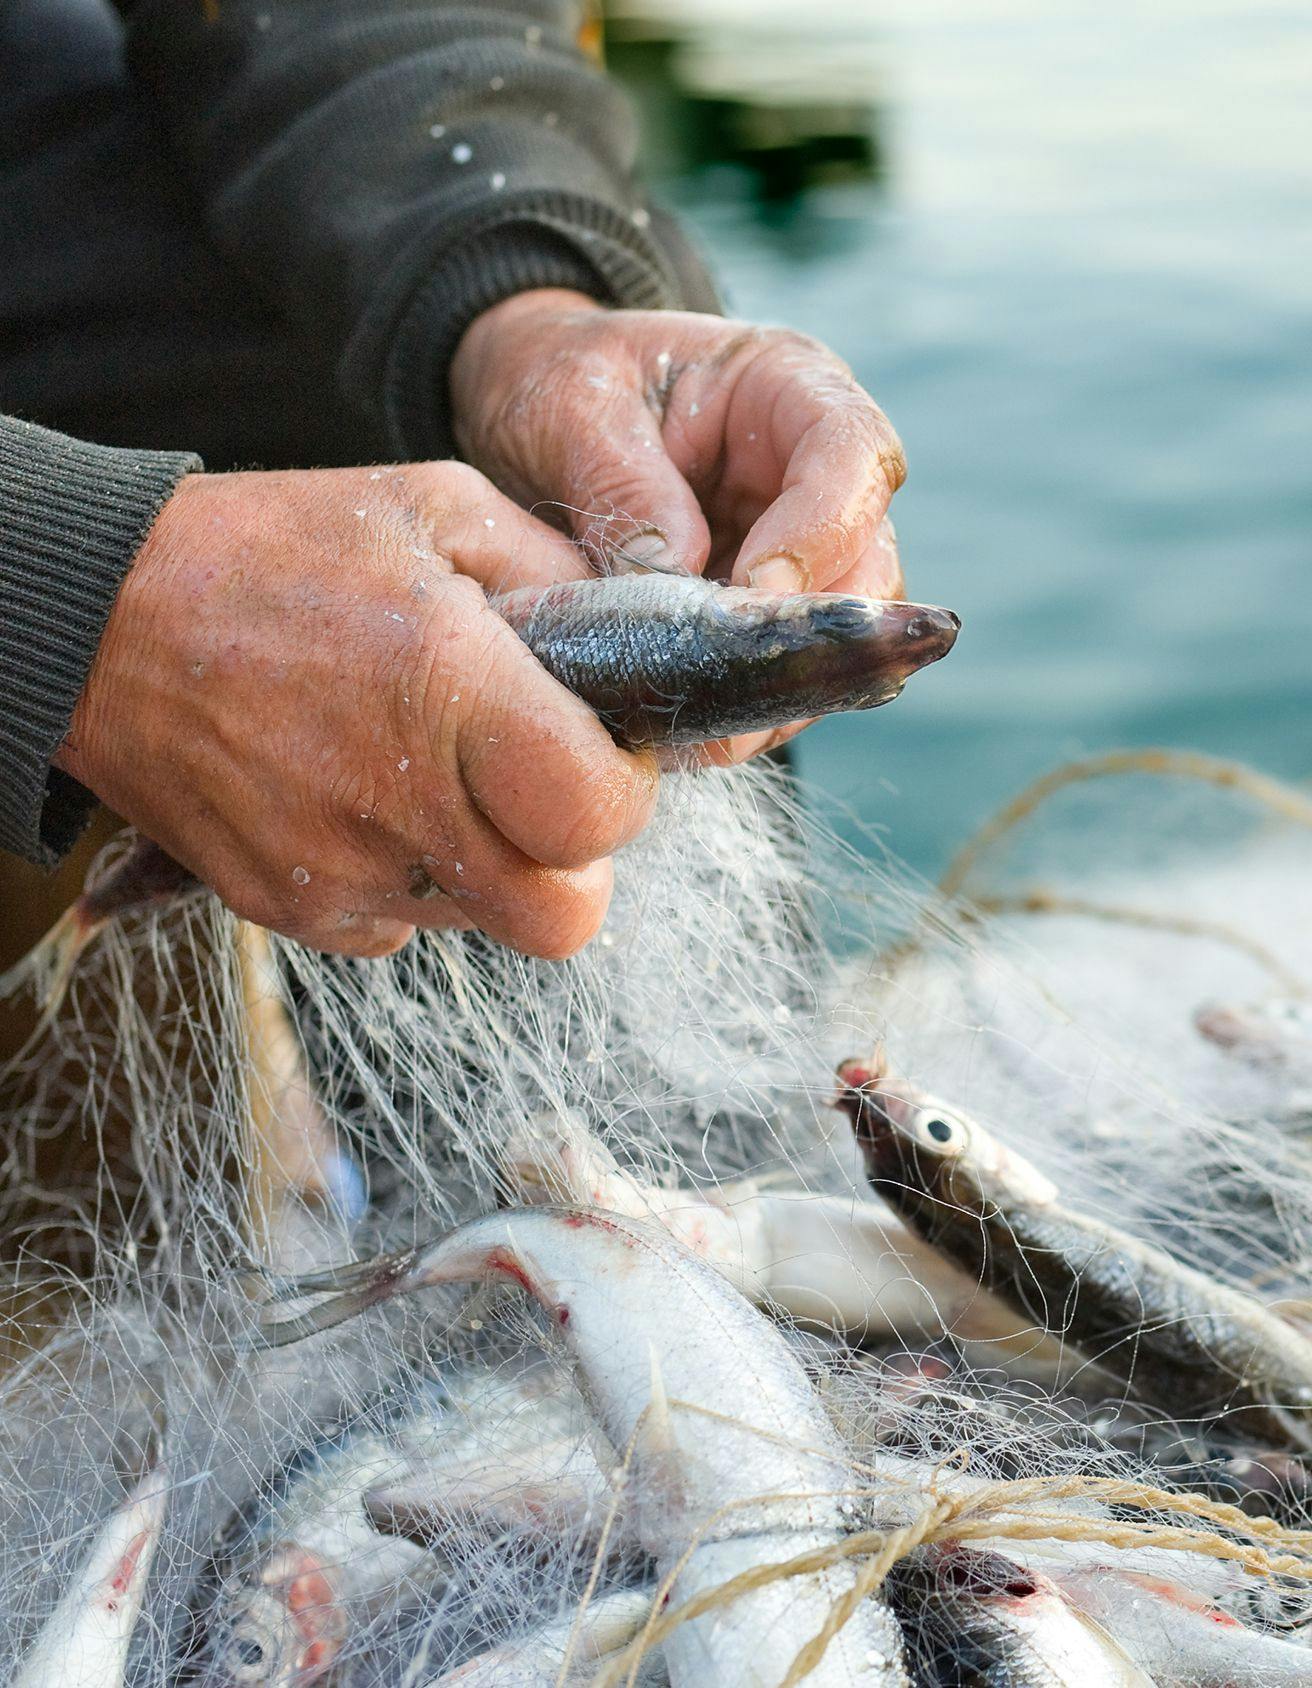 Close up of hands untangling a fish from a net above other several fish caught in a net